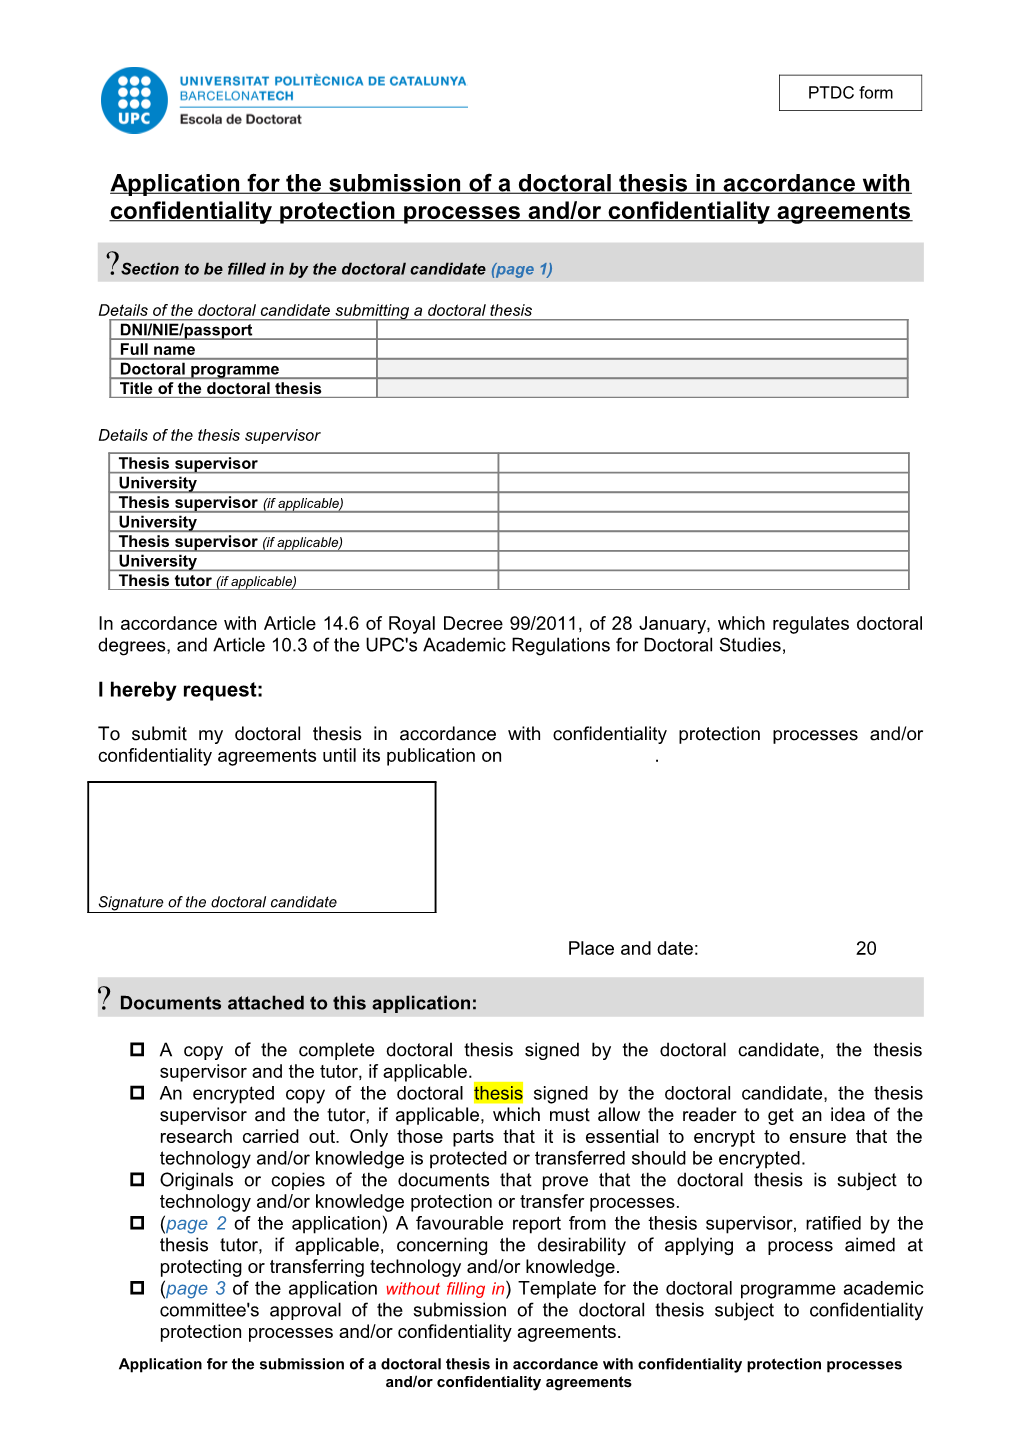 Application for the Submission of a Doctoral Thesis in Accordance with Confidentiality